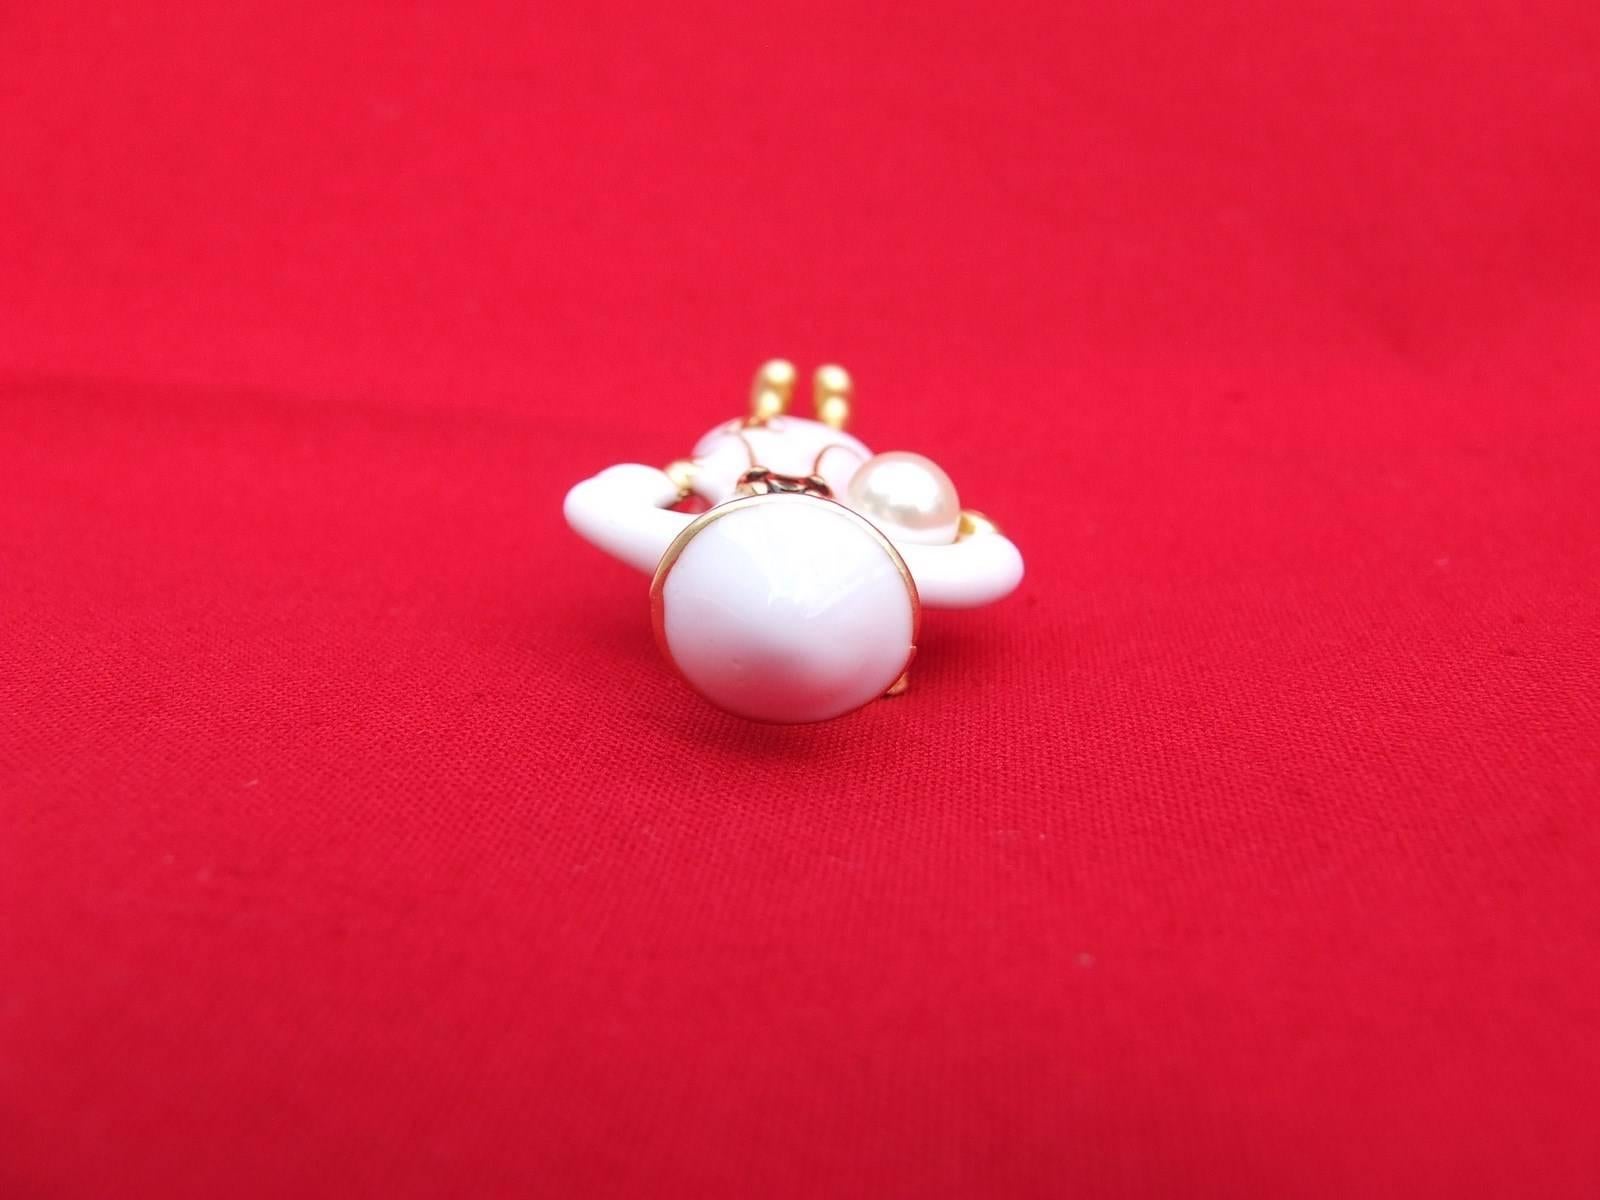 CHANEL Pin Brooch Madame Coco Chanel with pearl In Box 1